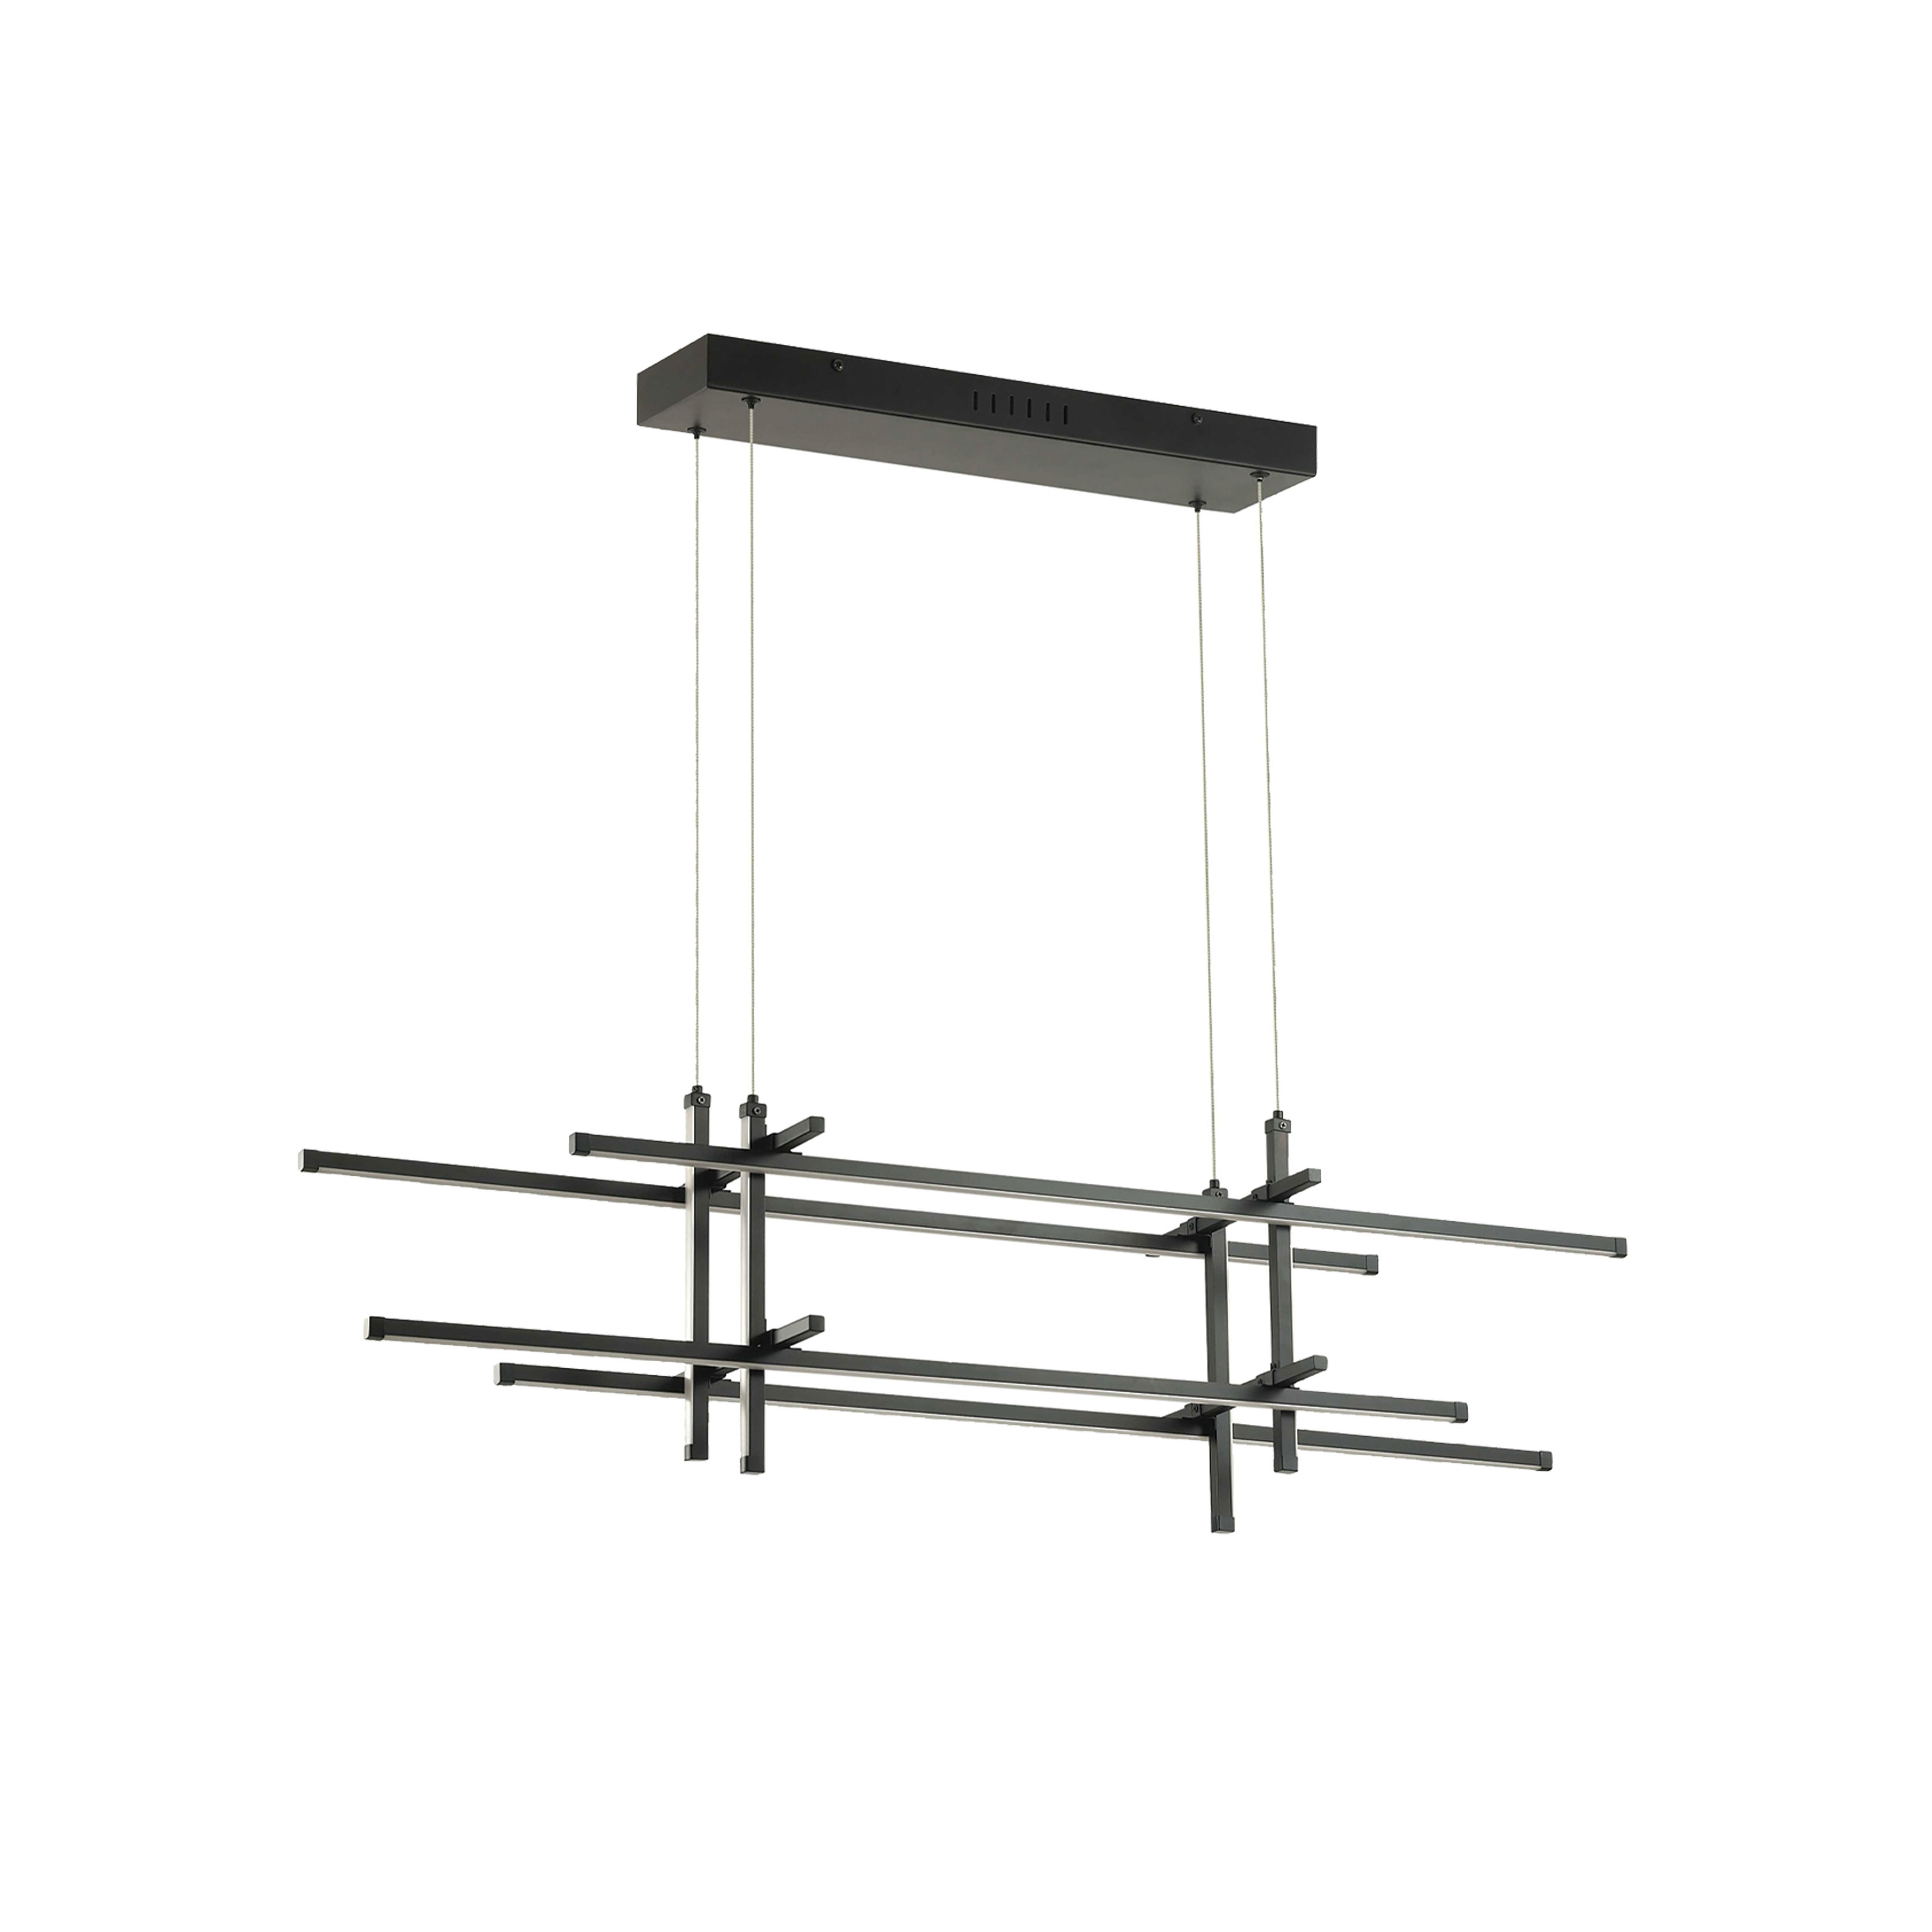 The Sally family of lighting makes a strong geometric statement with artistic flair. Inspired by mid-century modernism and its bold aesthetic, a Sally light will become a point of interest  and conversation  no matter where you place it. The linear frame in chic matte black drops down to a horizontal configuration of criss-crossing lines. It's an attention-getter, and one that adds a note of luxury to your home décor, enhancing the furnishings around it. A Sally lighting fixture adds interest to dining and living rooms, and sets a stylish tone for the foyer.